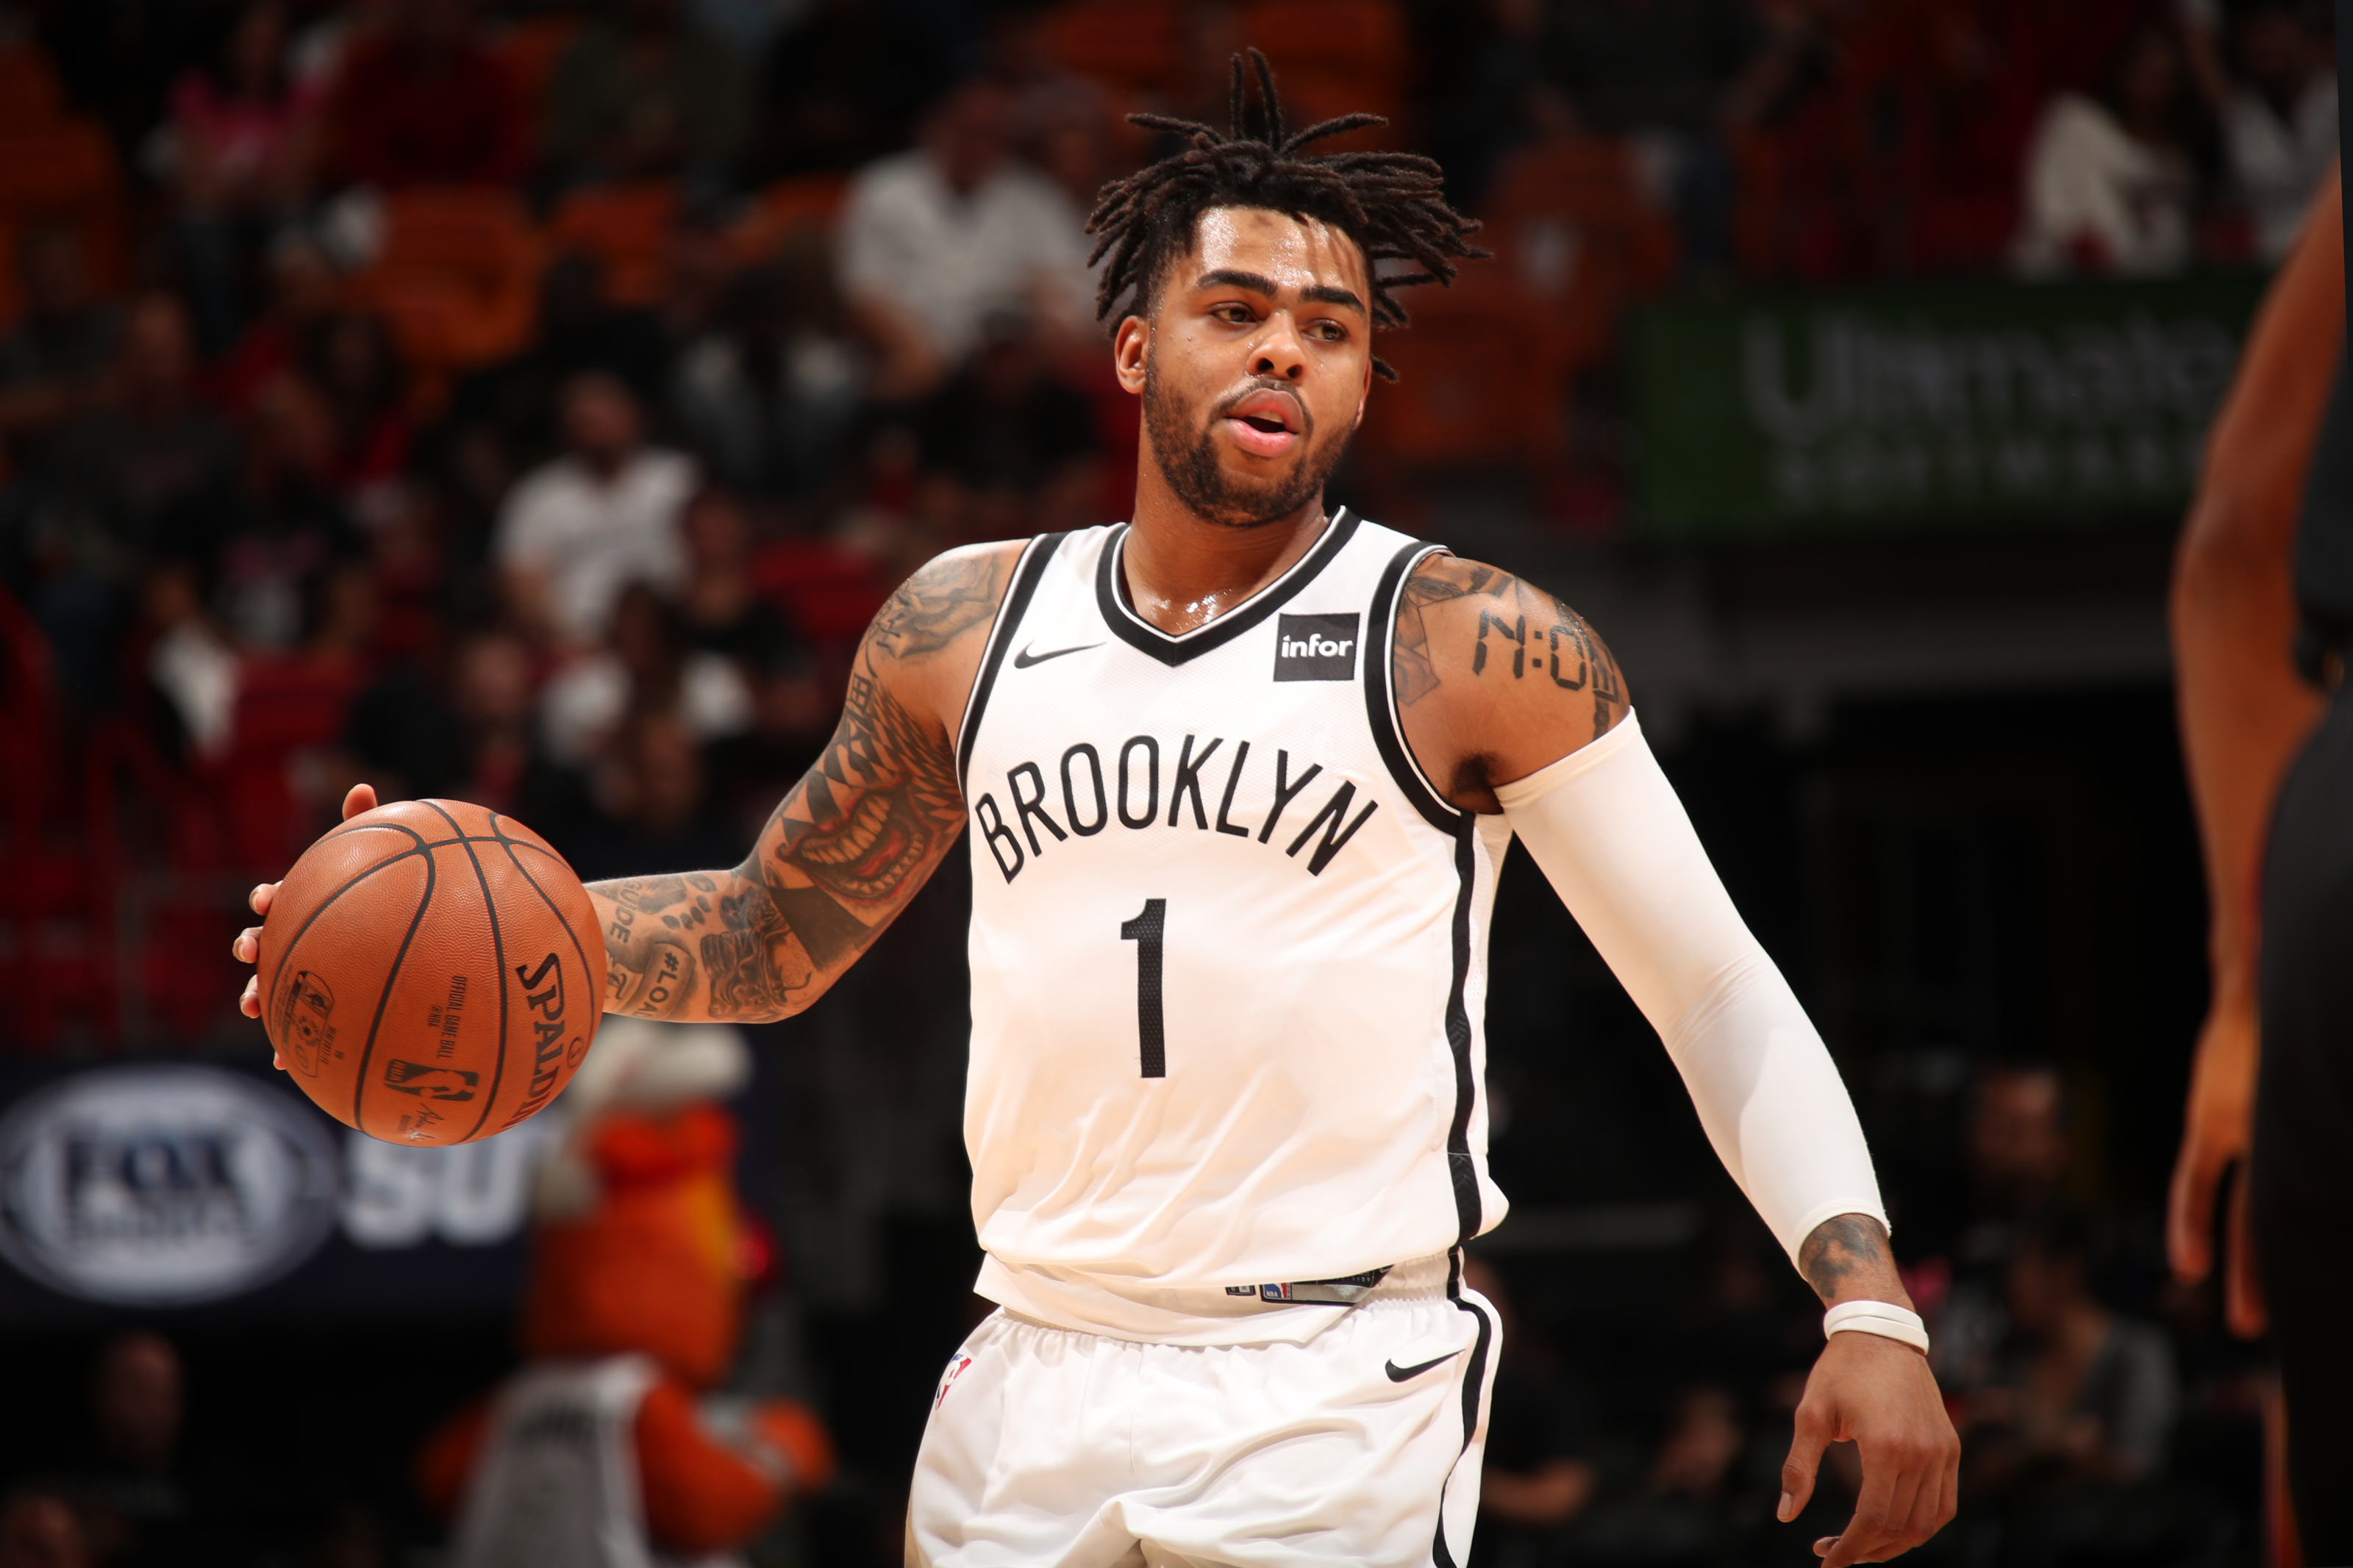 Brookyn Nets: D'Angelo Russell's free agency pitch to fellow NBA